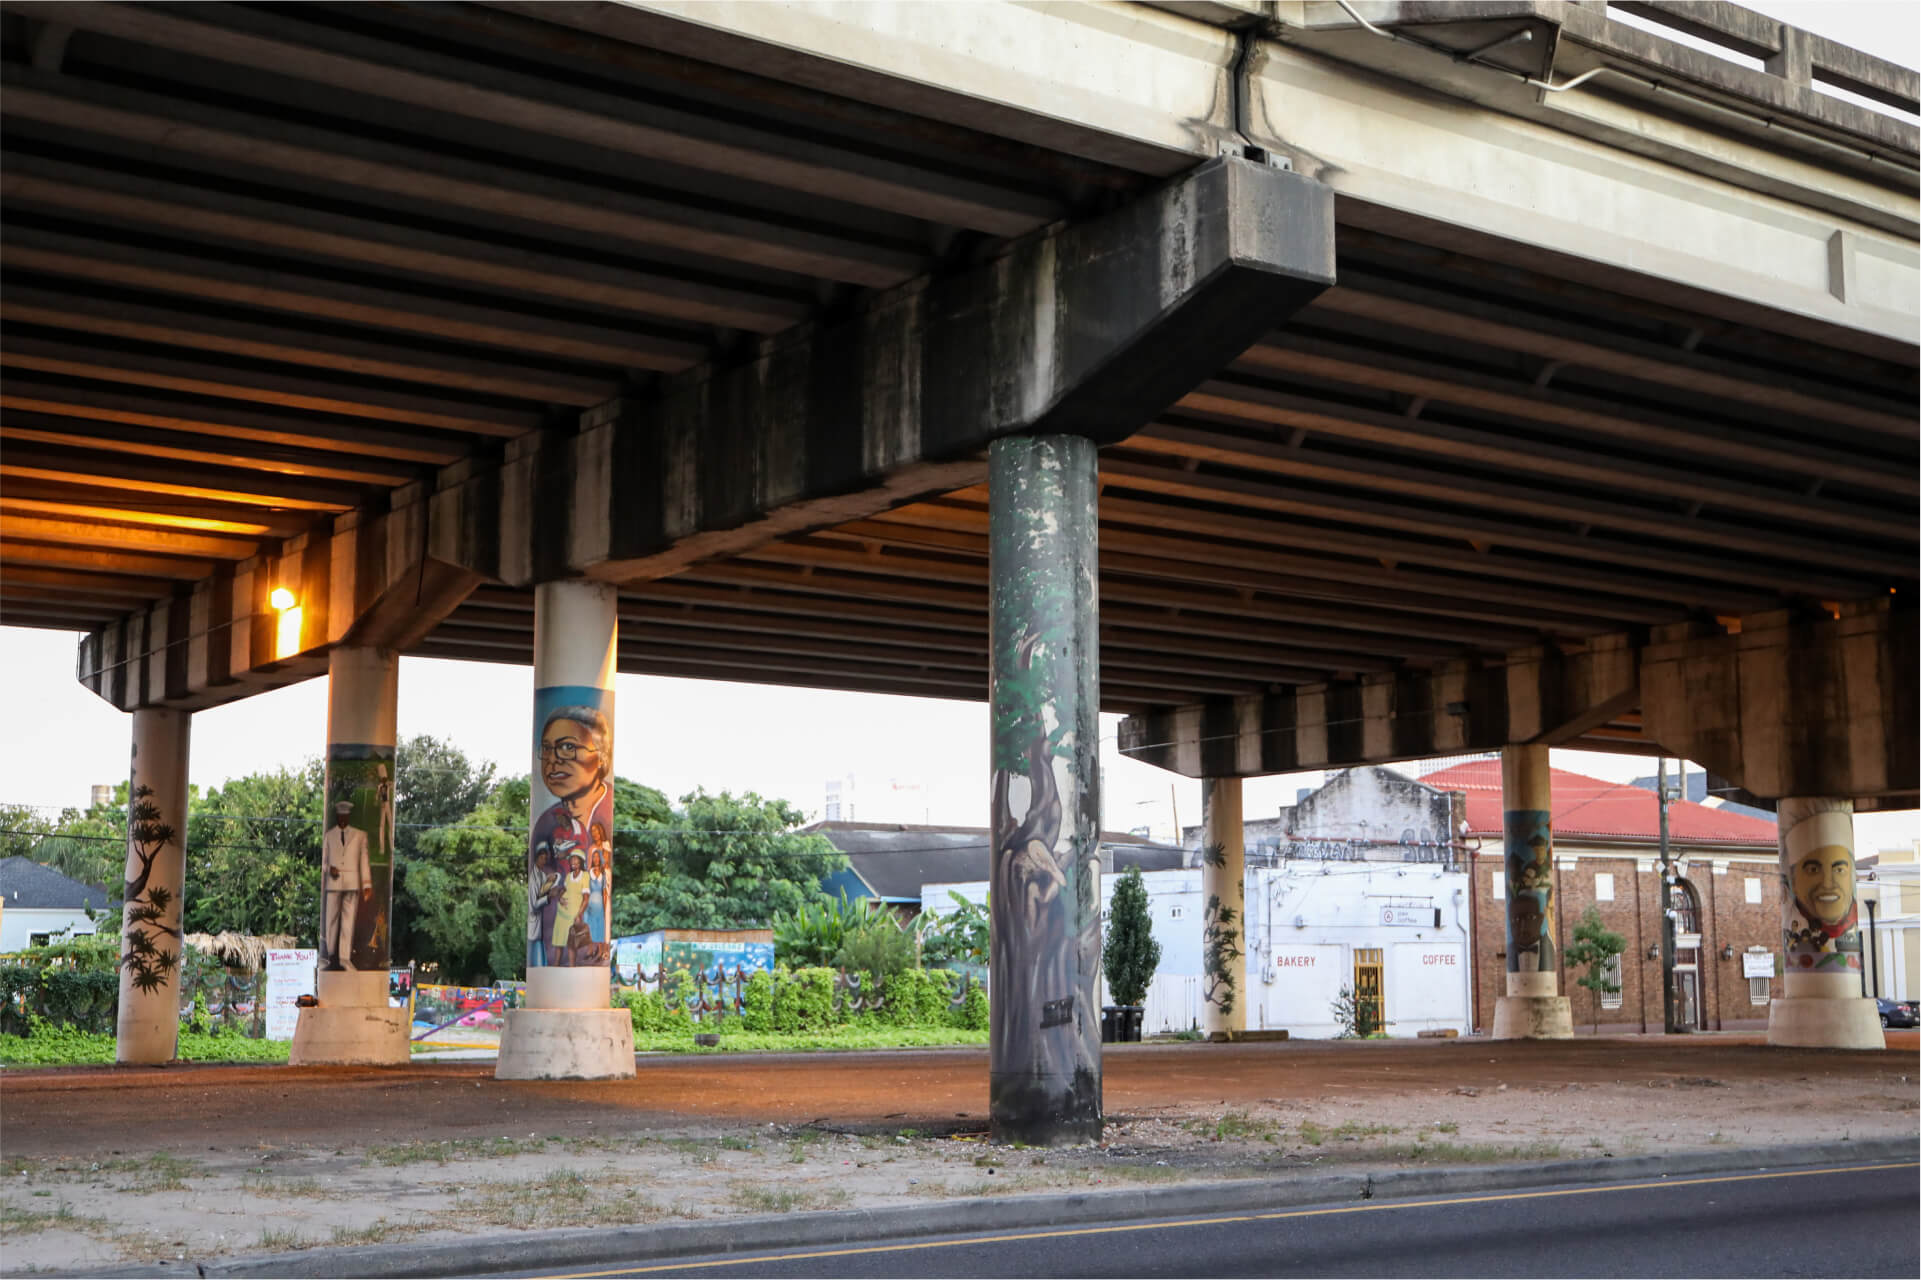 An overpass with murals on the support pillars and a decaying building on the other side of the street